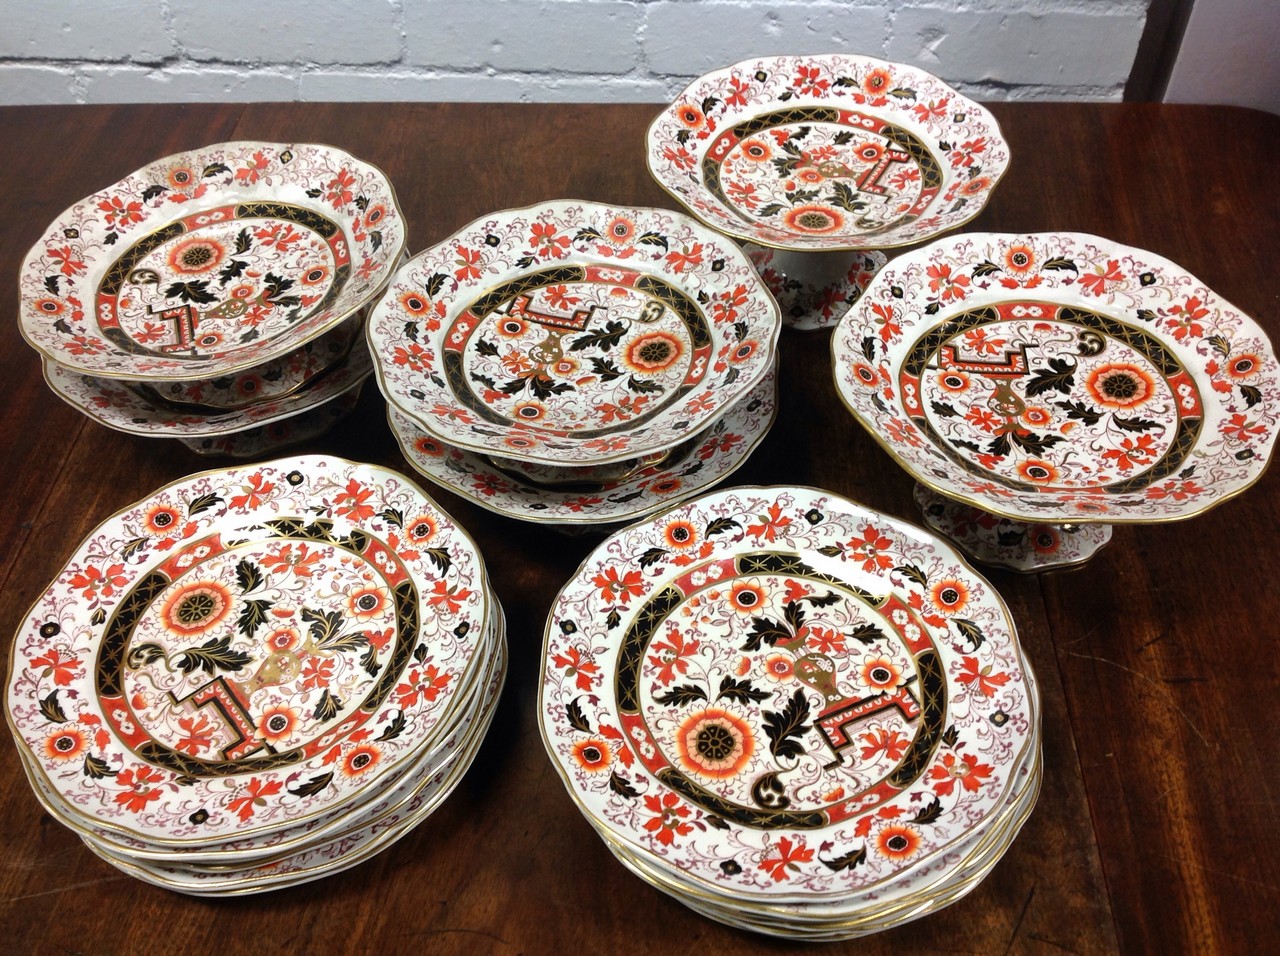 A Victorian Ironstone dessert service with two comports, four tazzas and twelve plates, all